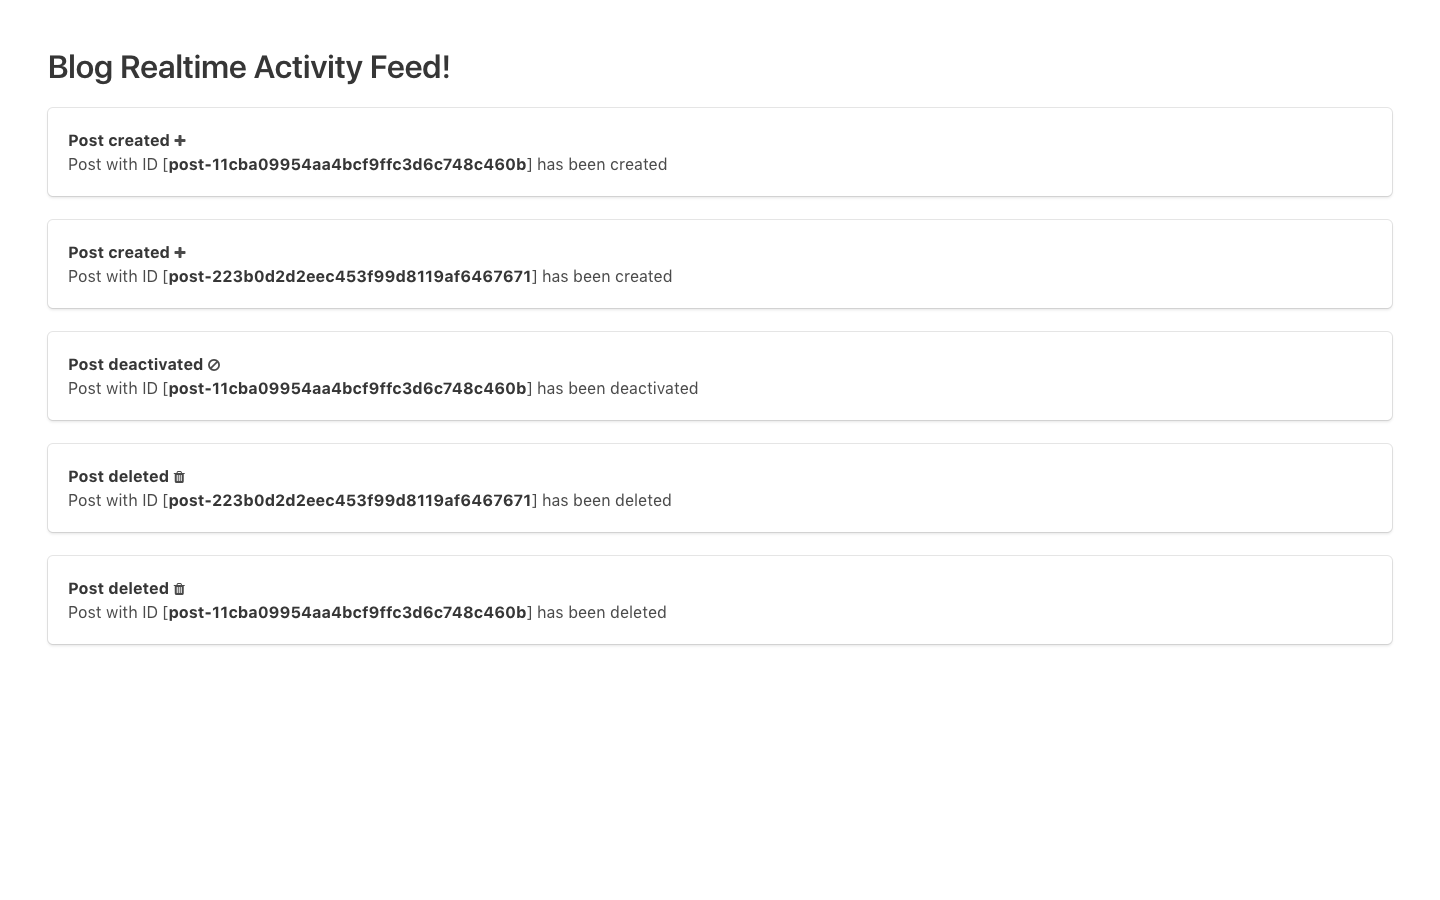 activity-feed-flask-post-created